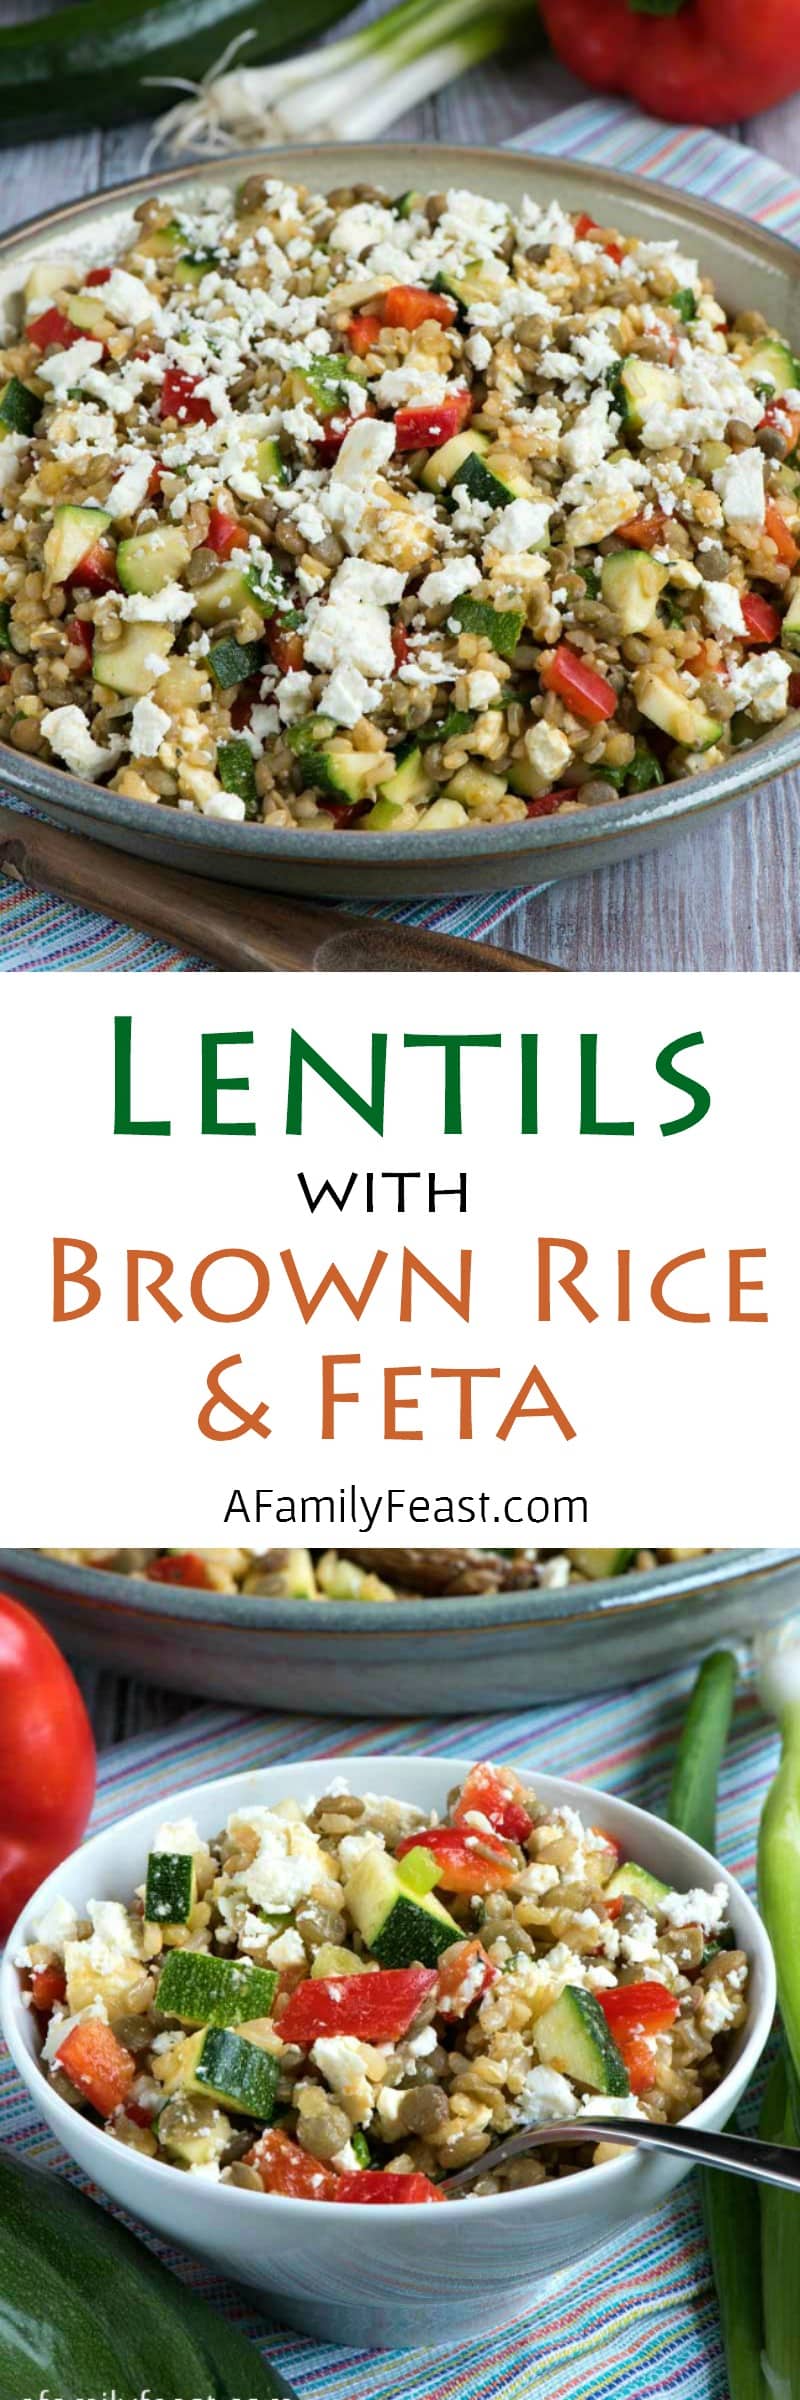 Lentils with Brown Rice and Feta - Healthy, delicious and super flavorful! Perfect for a meatless meal or served as a side dish.